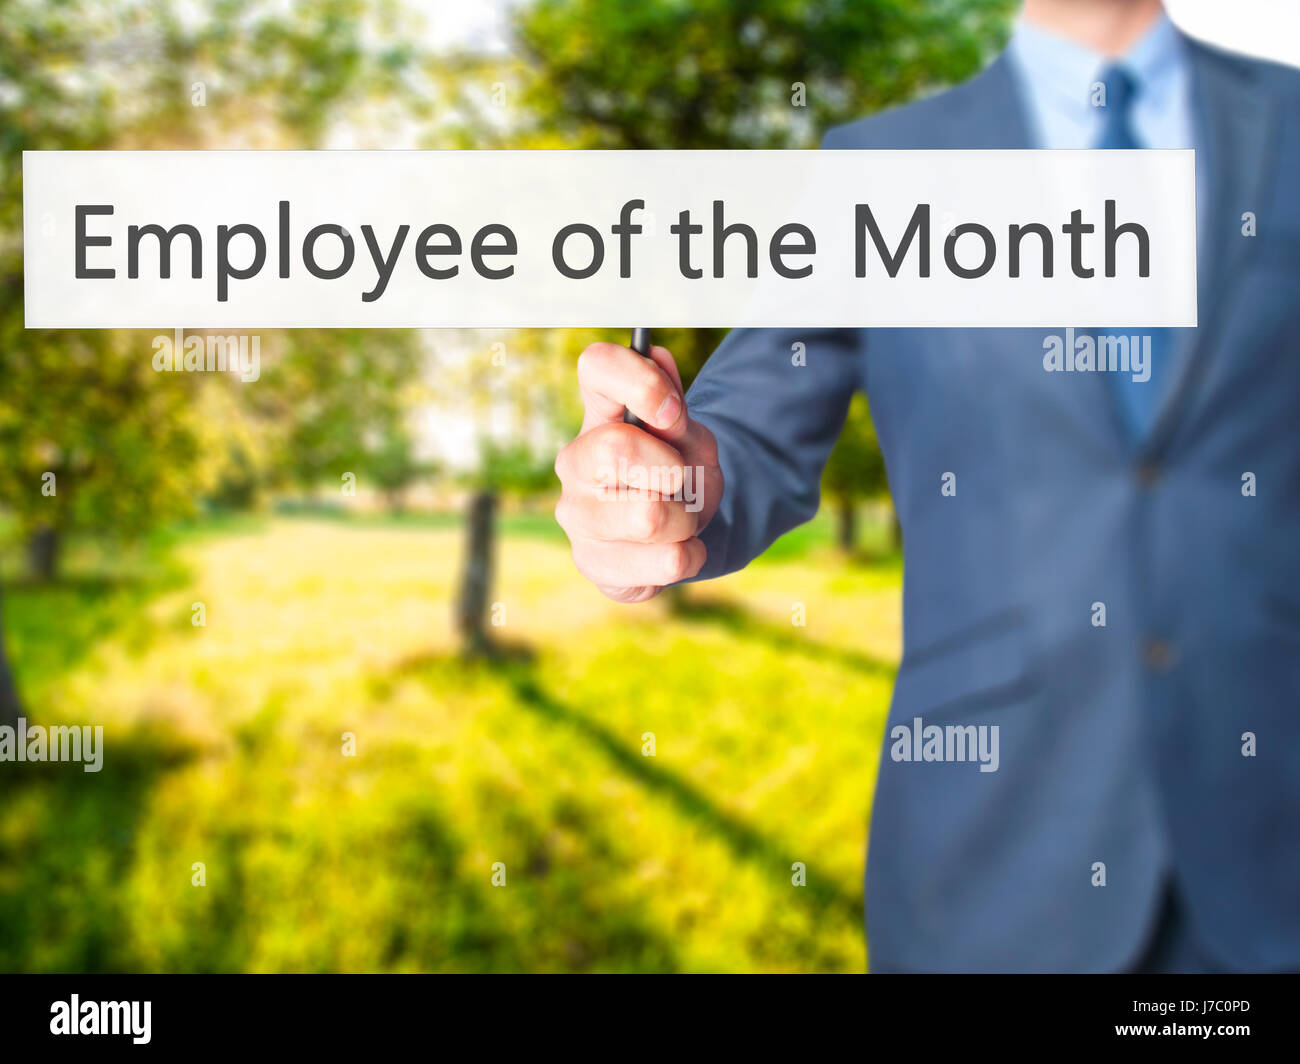 Employee of the Month - Businessman hand holding sign. Business, technology, internet concept. Stock Photo Stock Photo